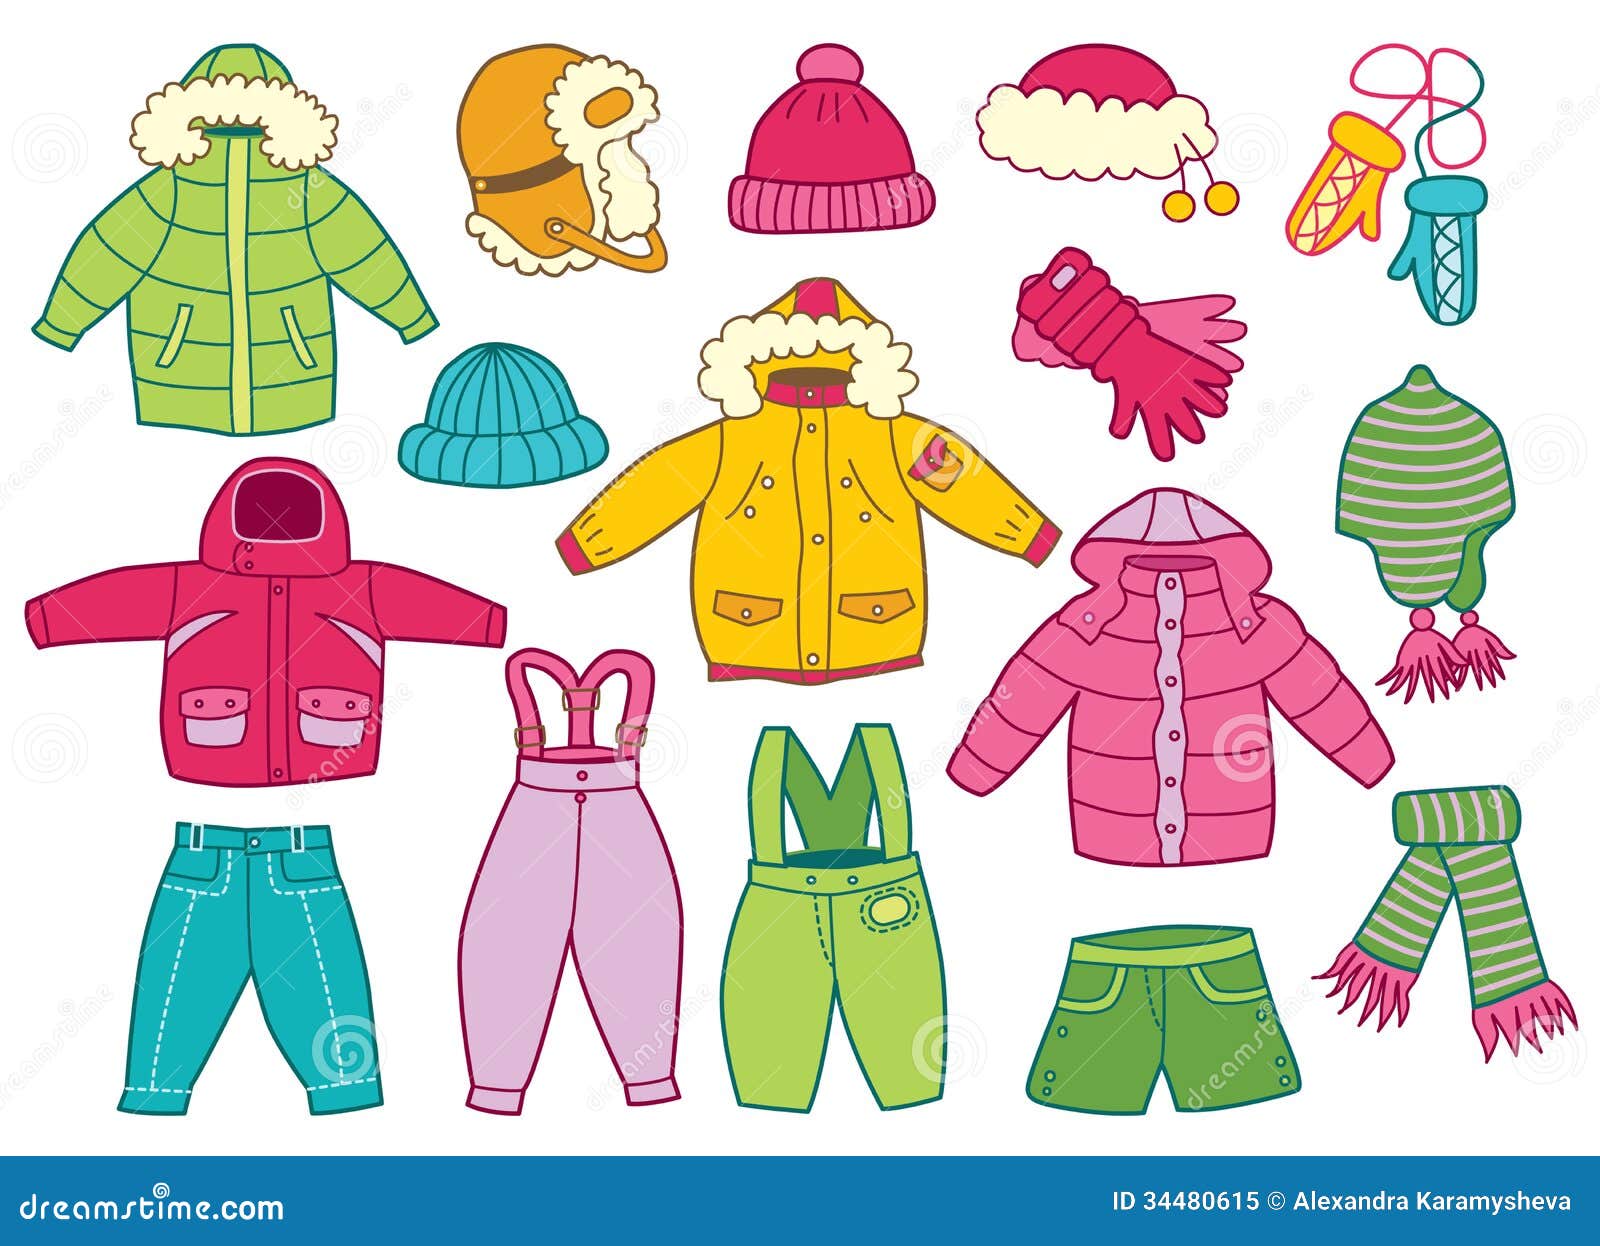 clipart of clothes - photo #39